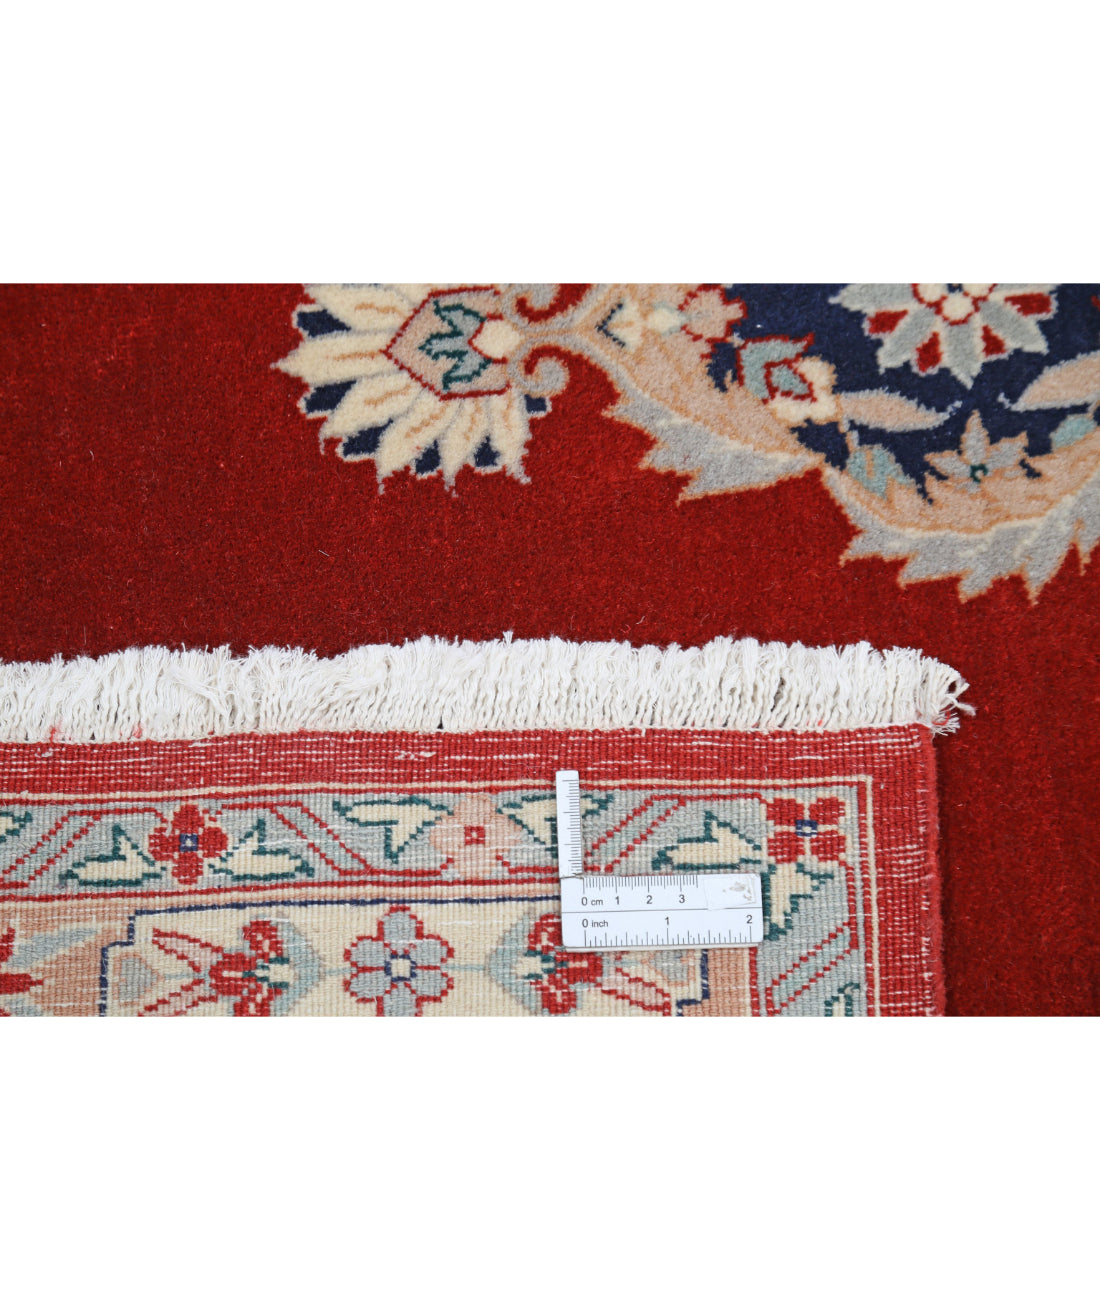 Hand Knotted Heritage Fine Persian Style Wool Rug - 6'0'' x 8'11'' 6'0'' x 8'11'' (180 X 268) / Red / Blue